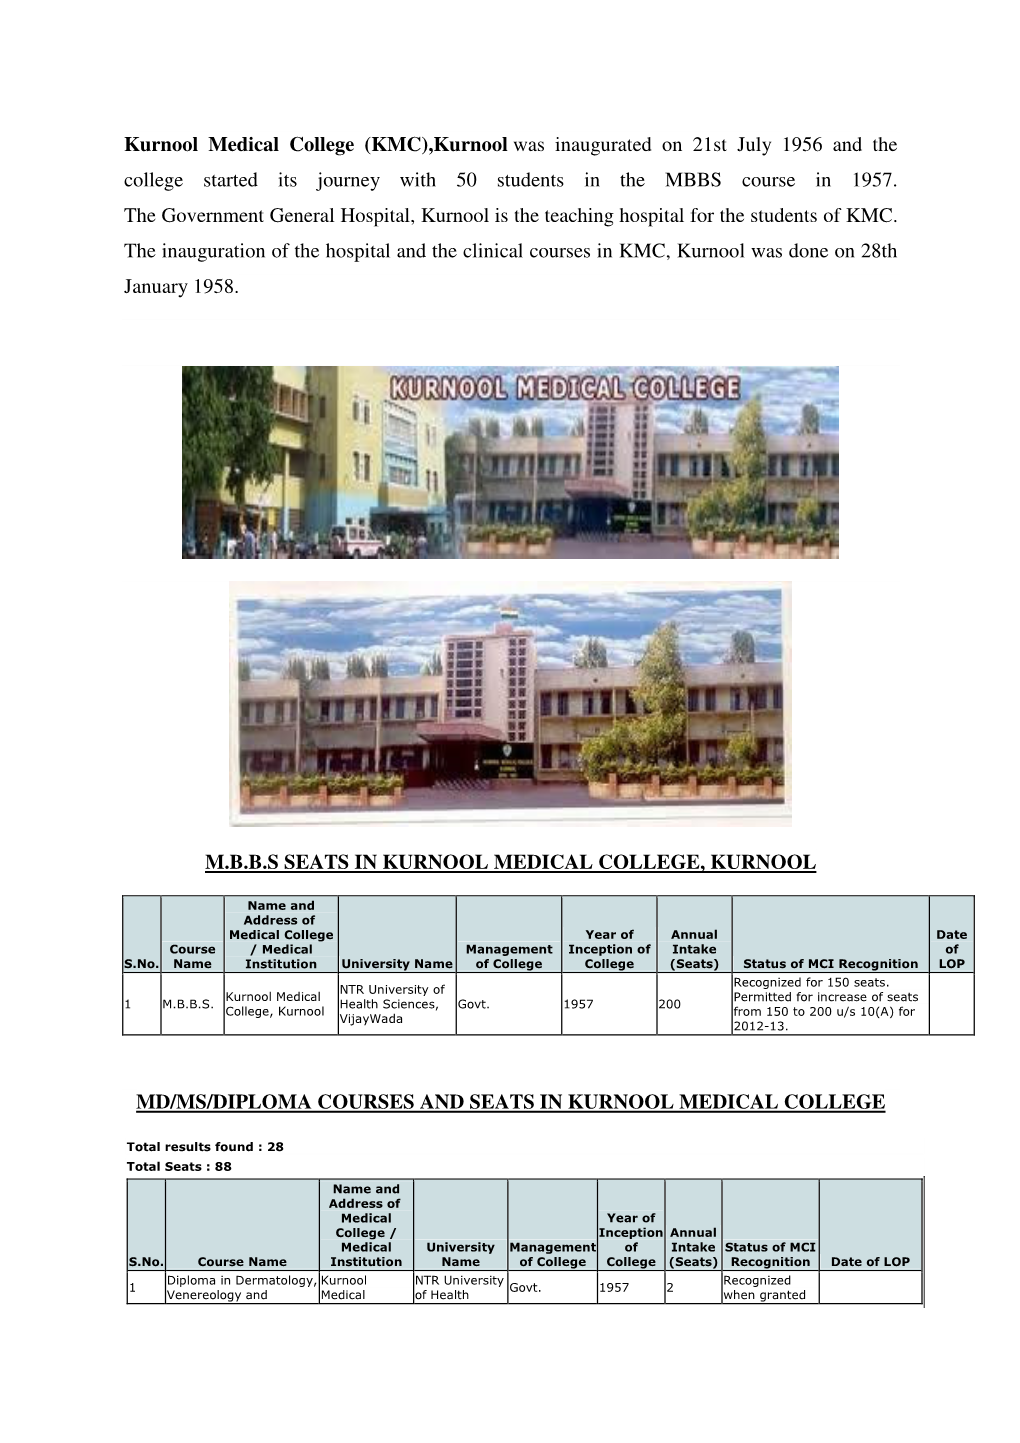 Kurnool Medical College (KMC),Kurnool Was Inaugurated on 21St July 1956 and the College Started Its Journey with 50 Students in the MBBS Course in 1957